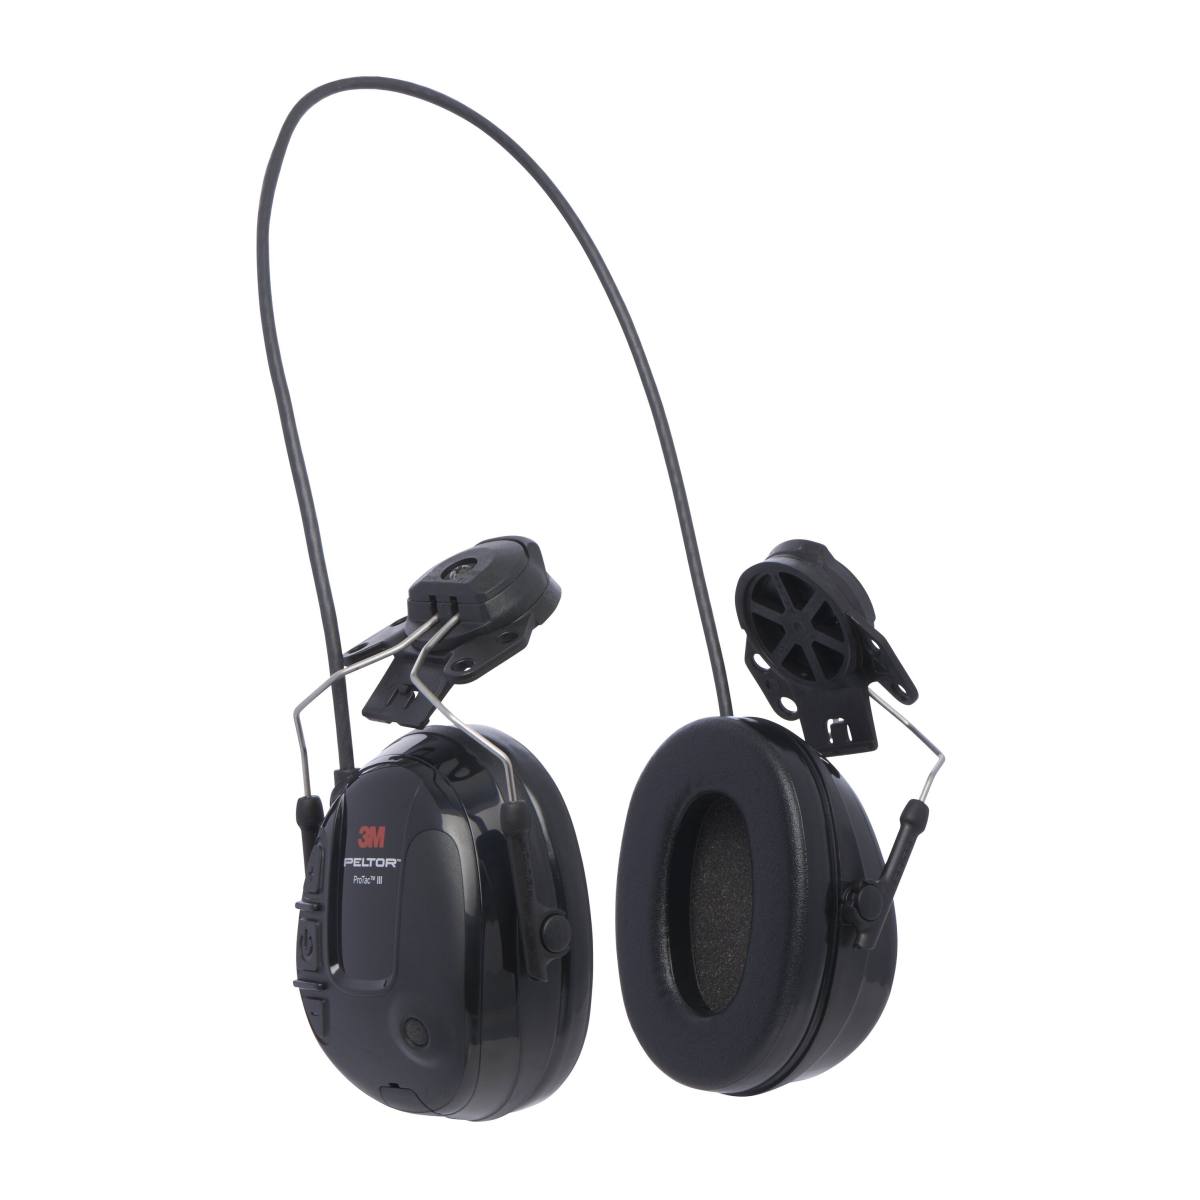 3M Peltor ProTac III Slim hearing protection headset, black, helmet version, with active, level-dependent attenuation technology for perceiving ambient noise, SNR = 25 dB, black